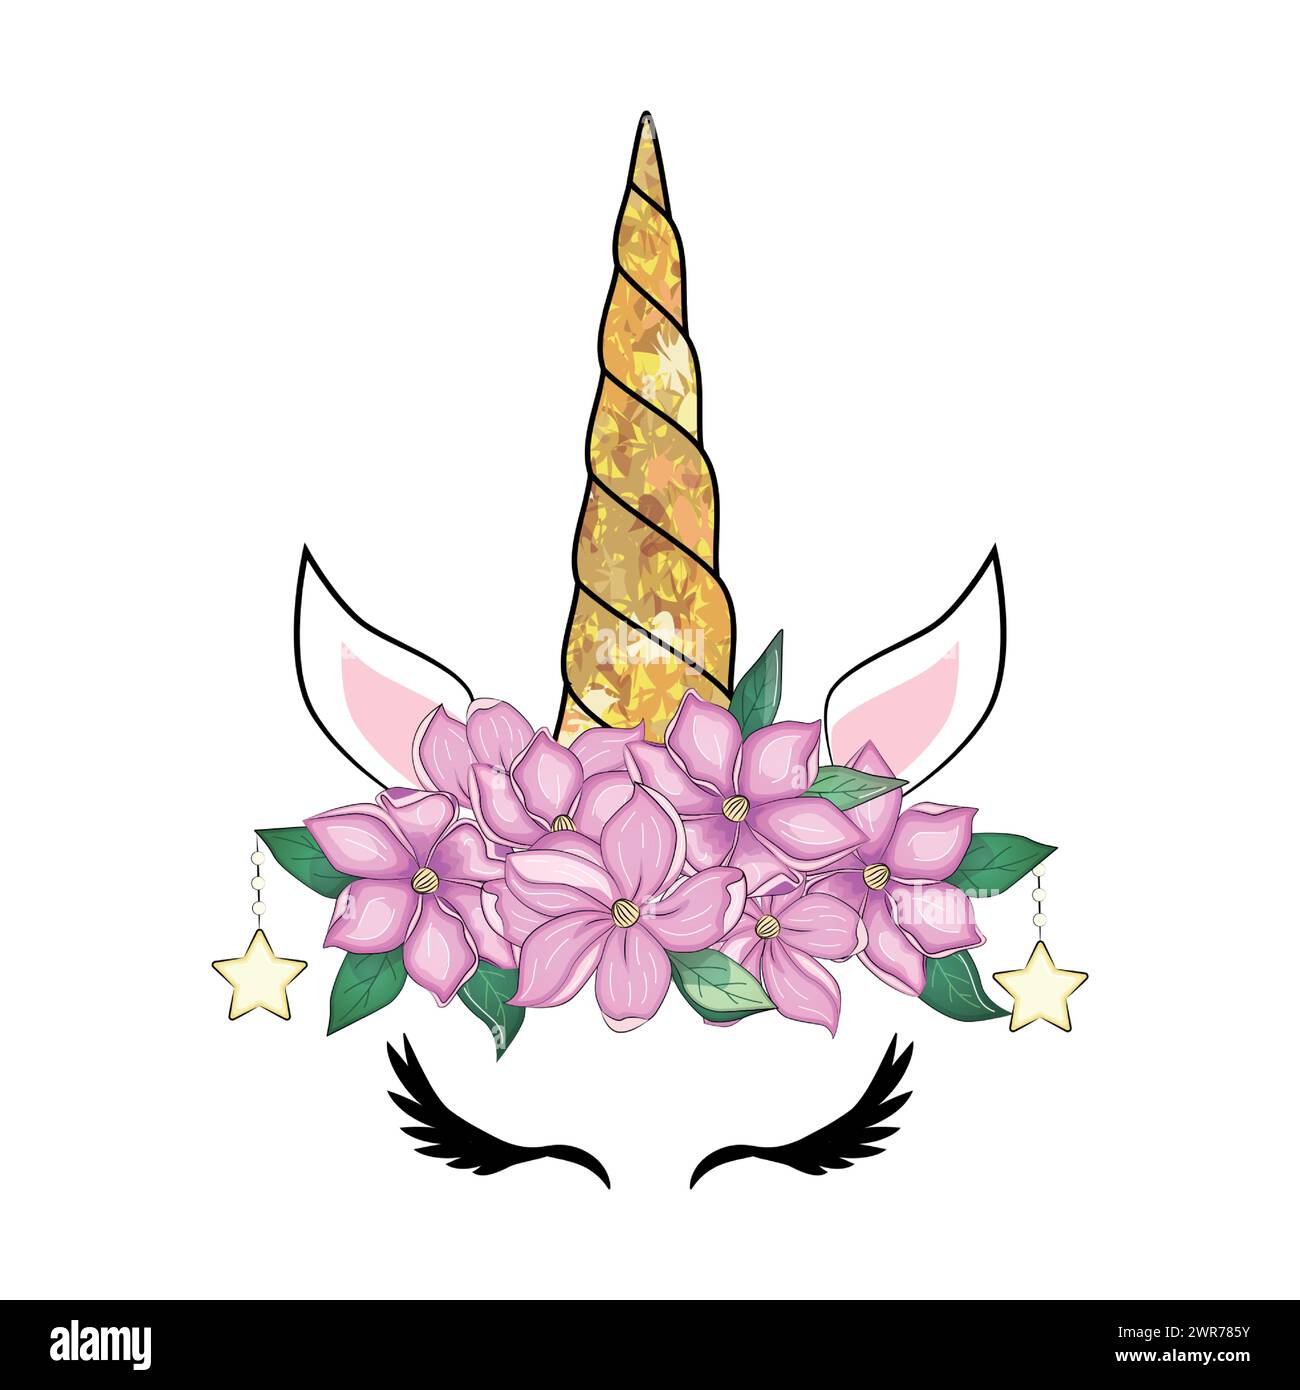 Cute unicorn head with flower crown Stock Vector